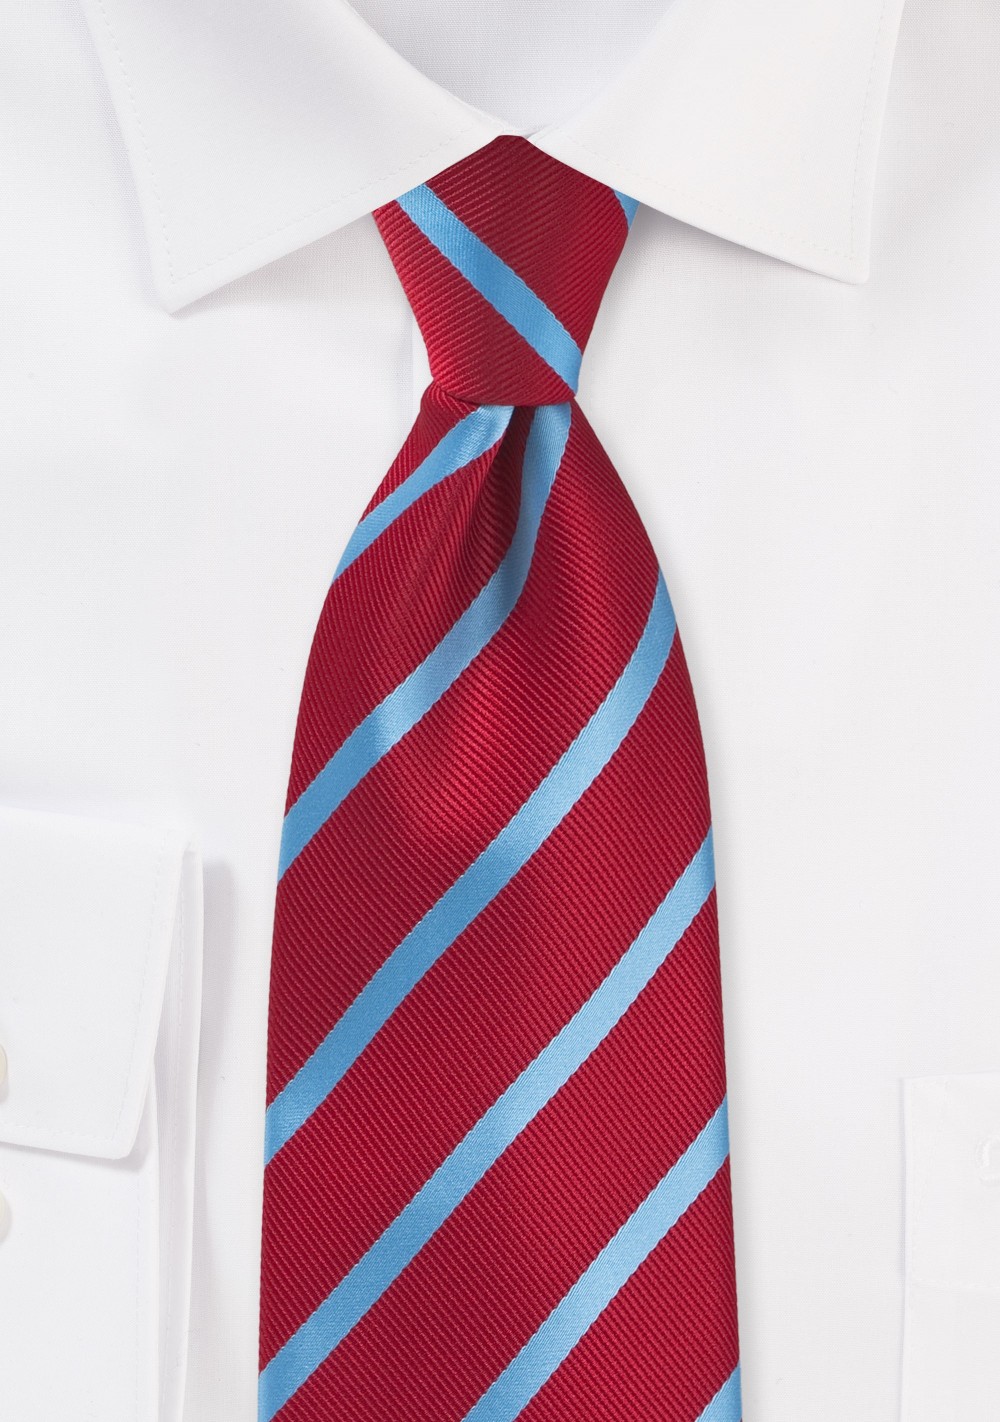 Tomato Red and Blue Striped Tie